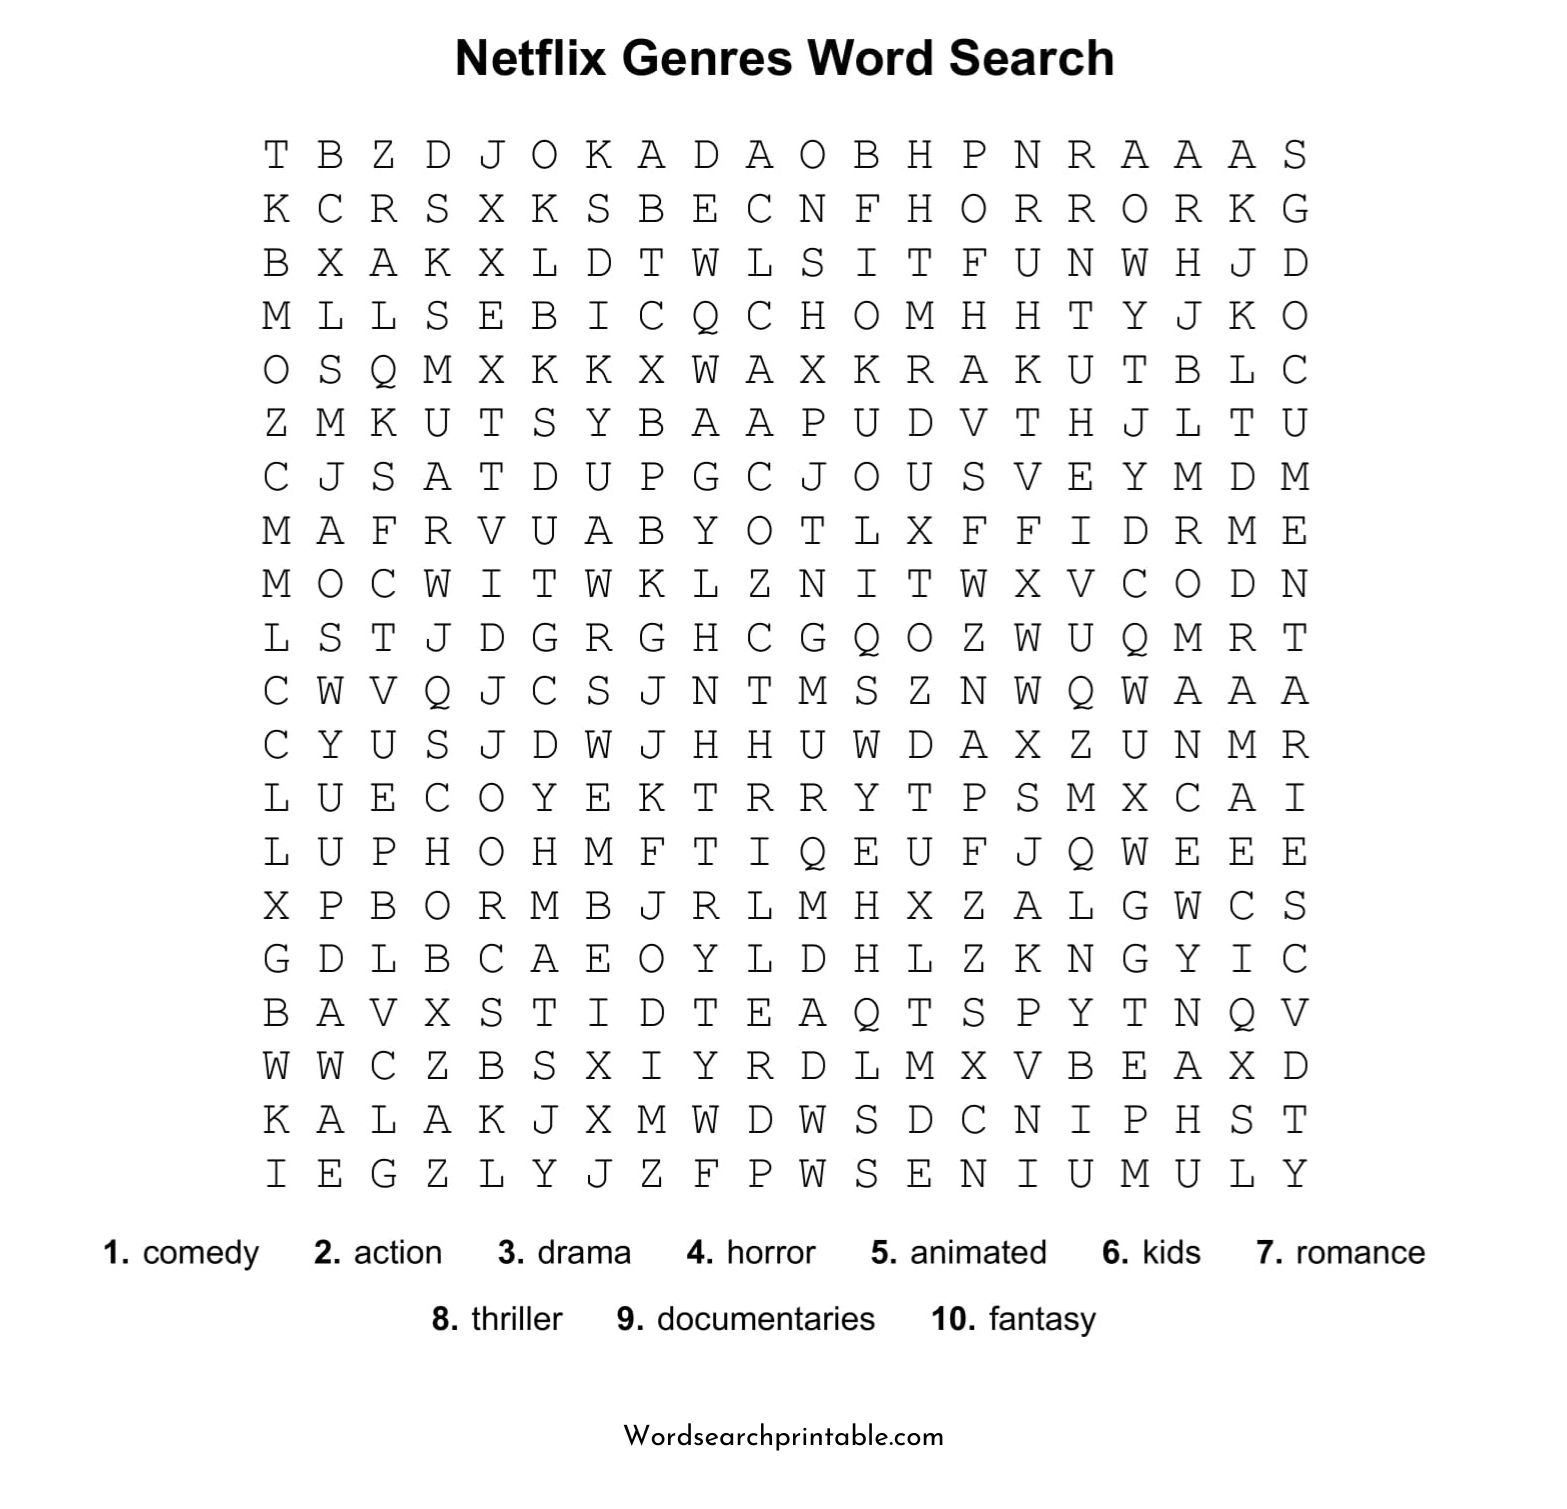 netflix genres word search puzzle